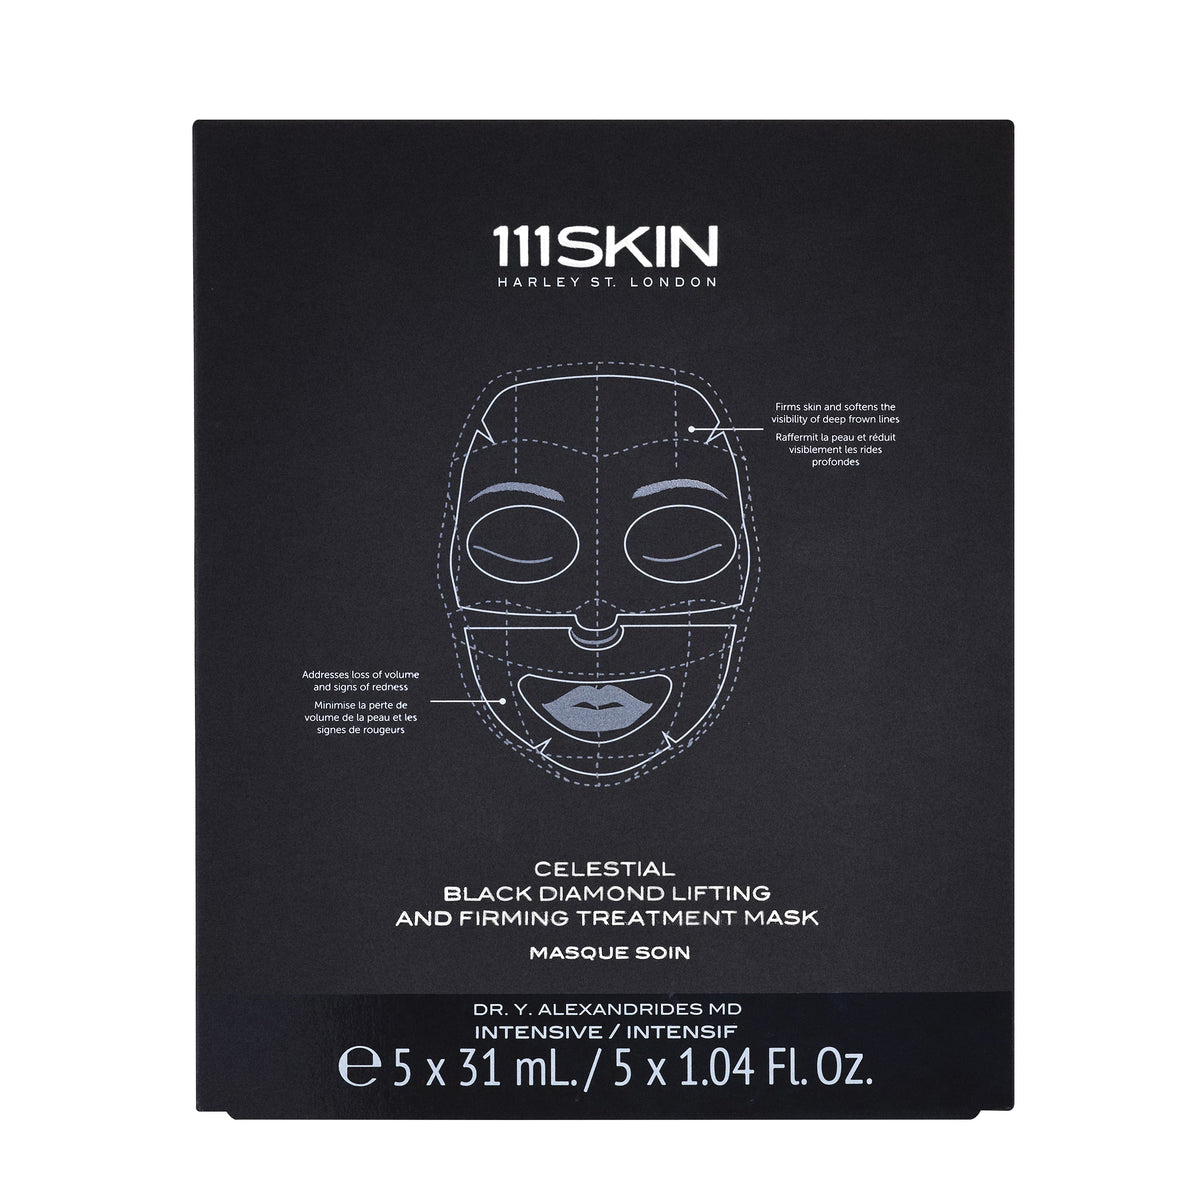 111Skin Celestial Black Diamond Lifting And Firming Face Mask Box